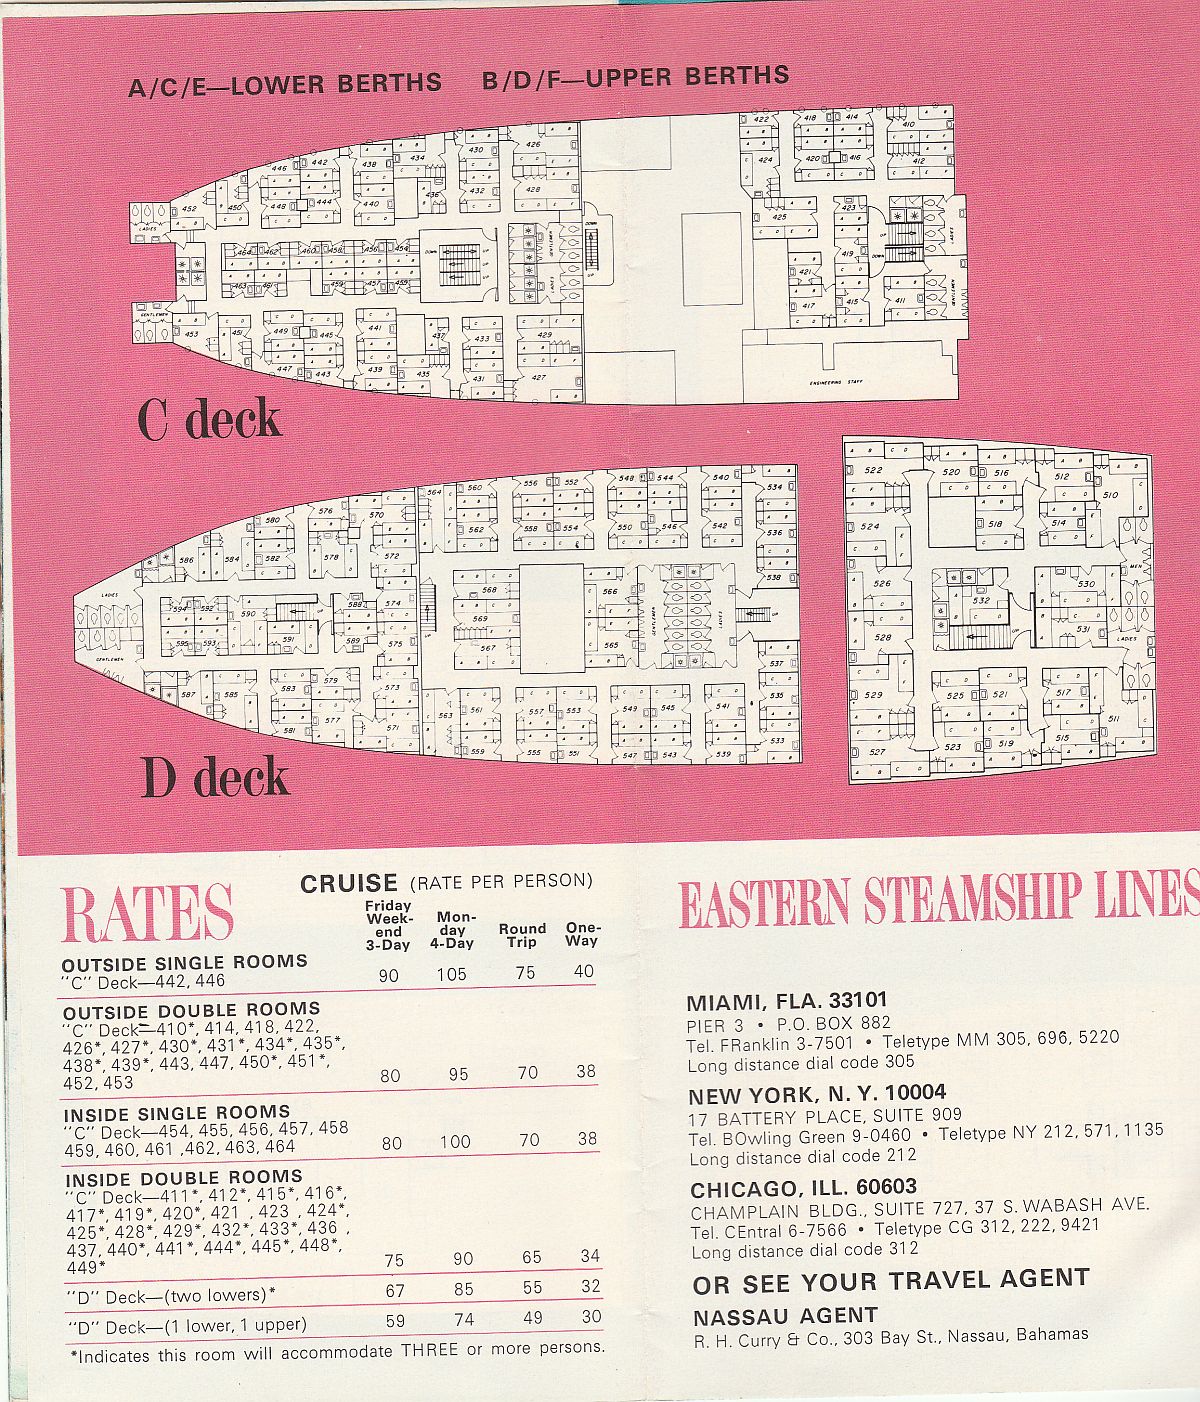 ss Bahama Star Deck plans (cont'd): C deck & D deck and Eastern Steamship Lines offices